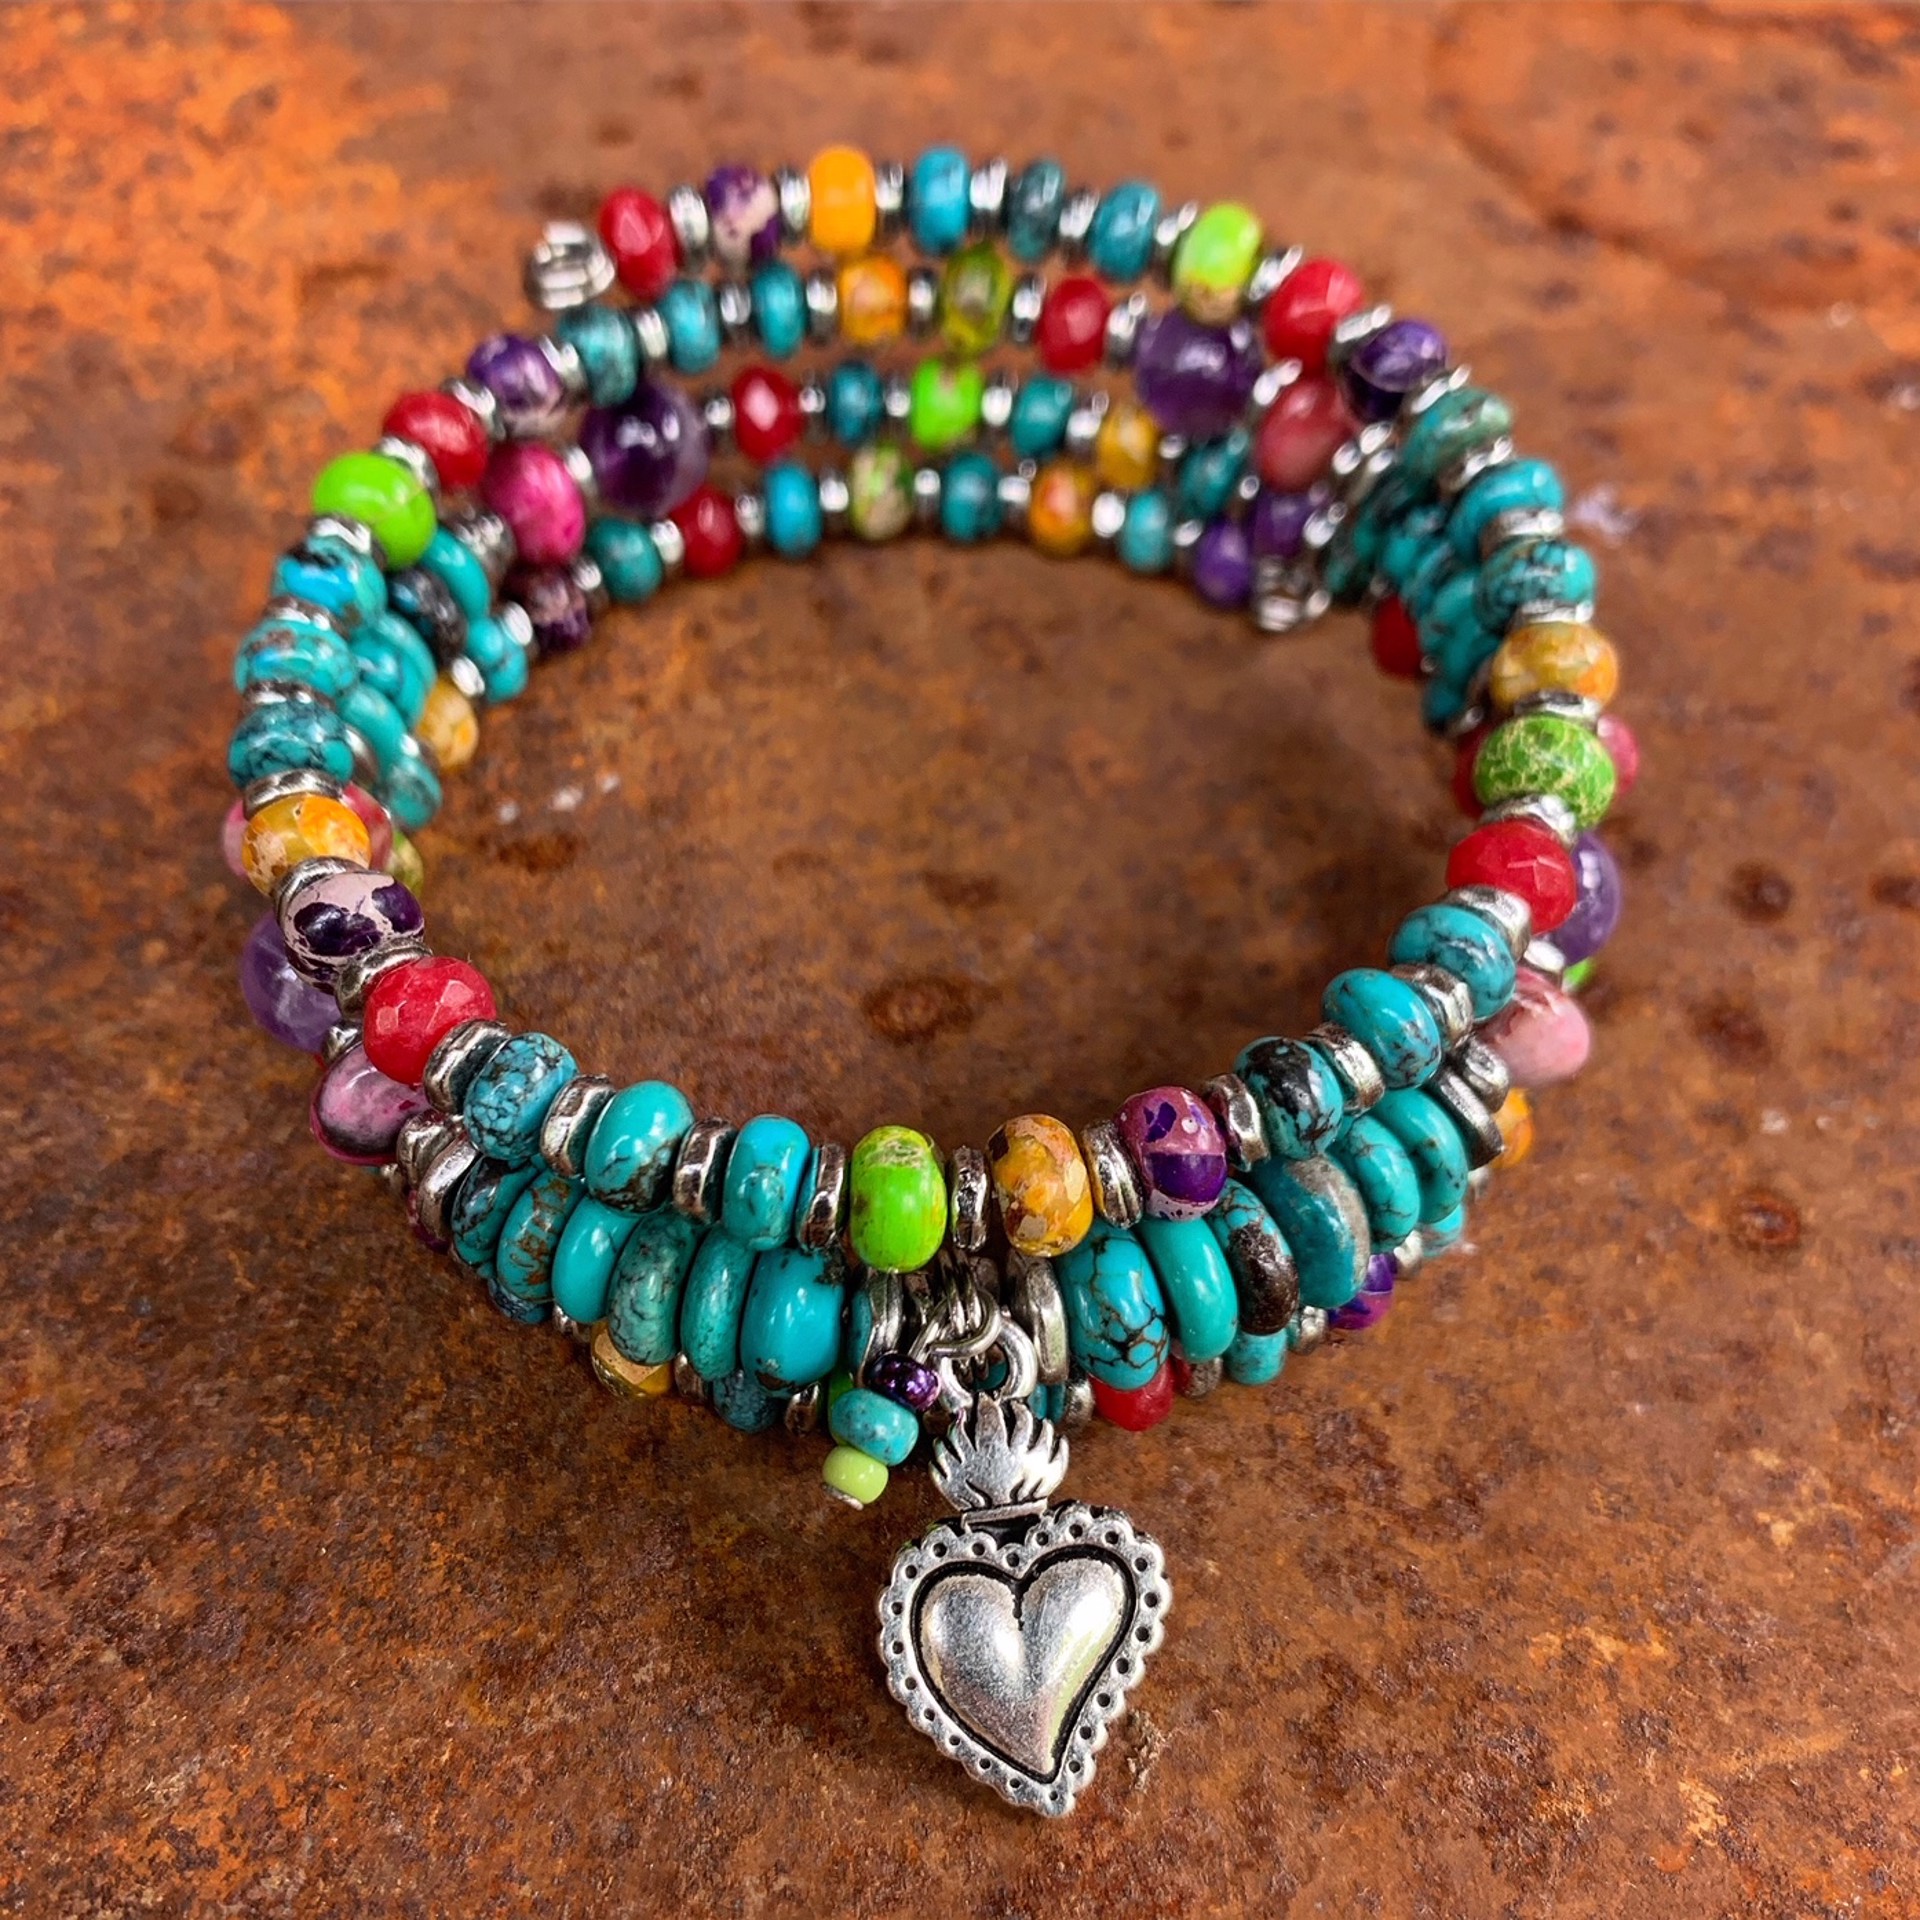 K841 Turquoise and Jasper Sacred Heart Charm Bracelet by Kelly Ormsby